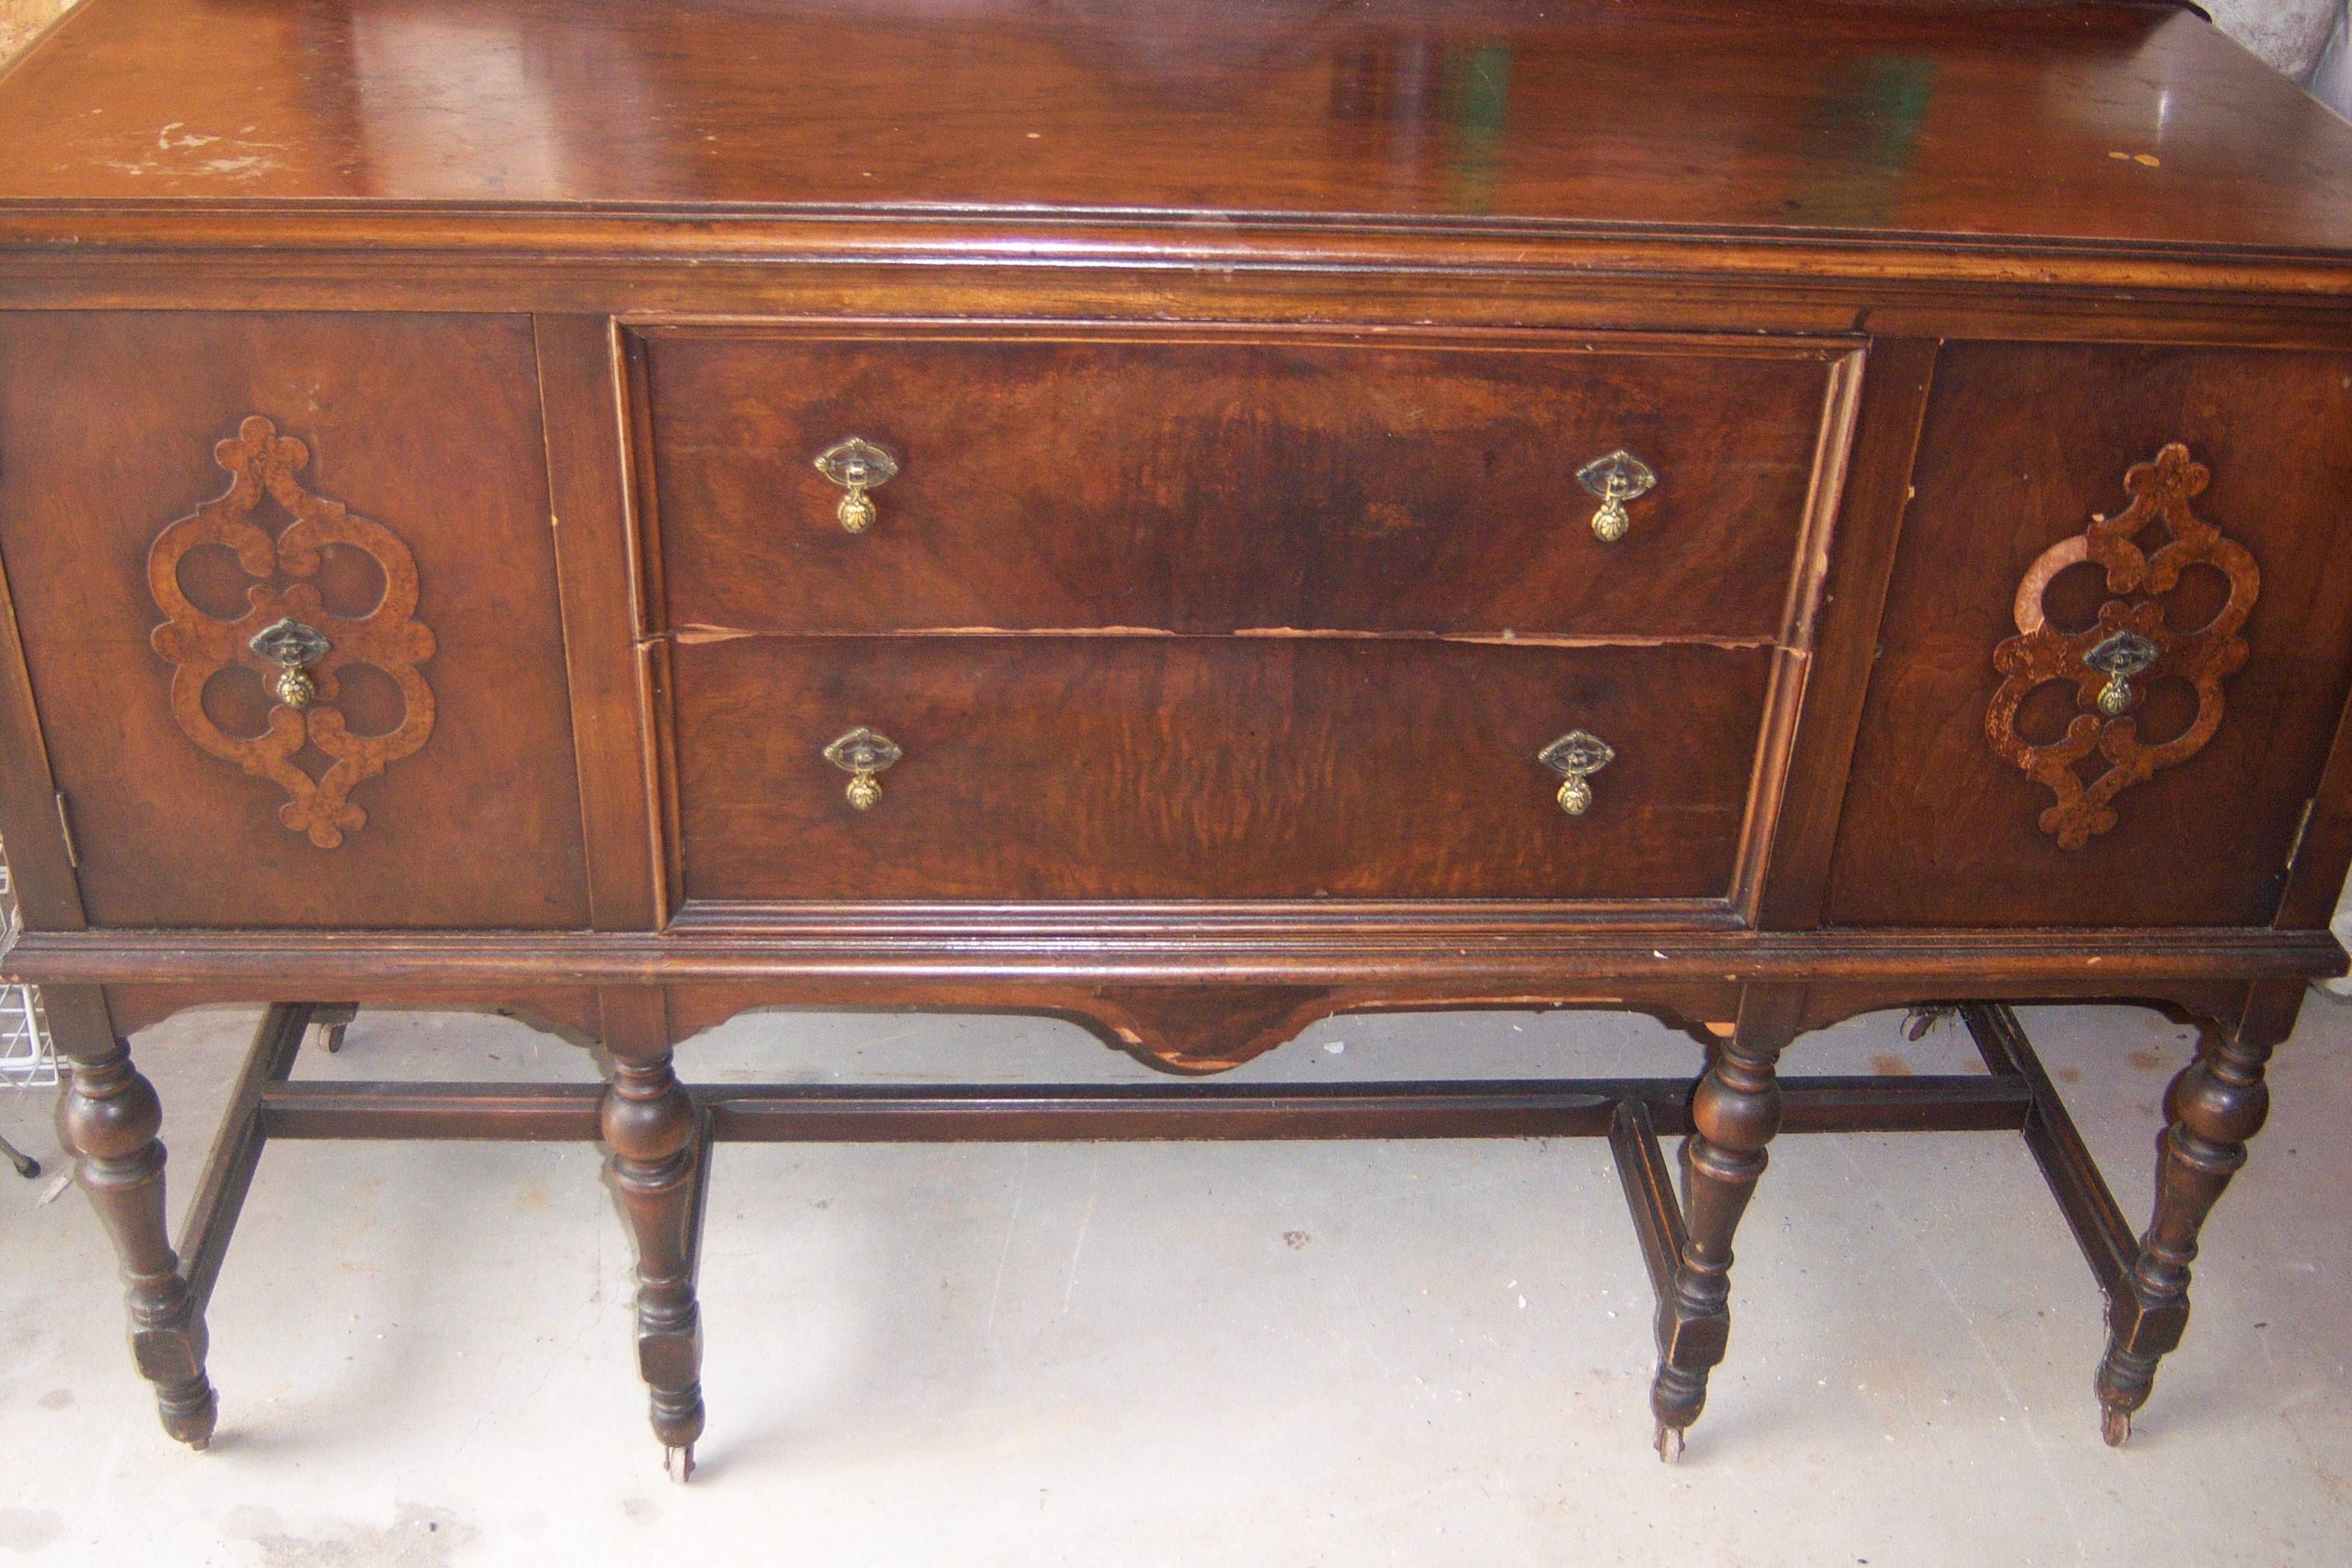 Antique Sideboard Buffet For Sale | Antiques | Classifieds Inside Sideboard Sale (Photo 19 of 20)